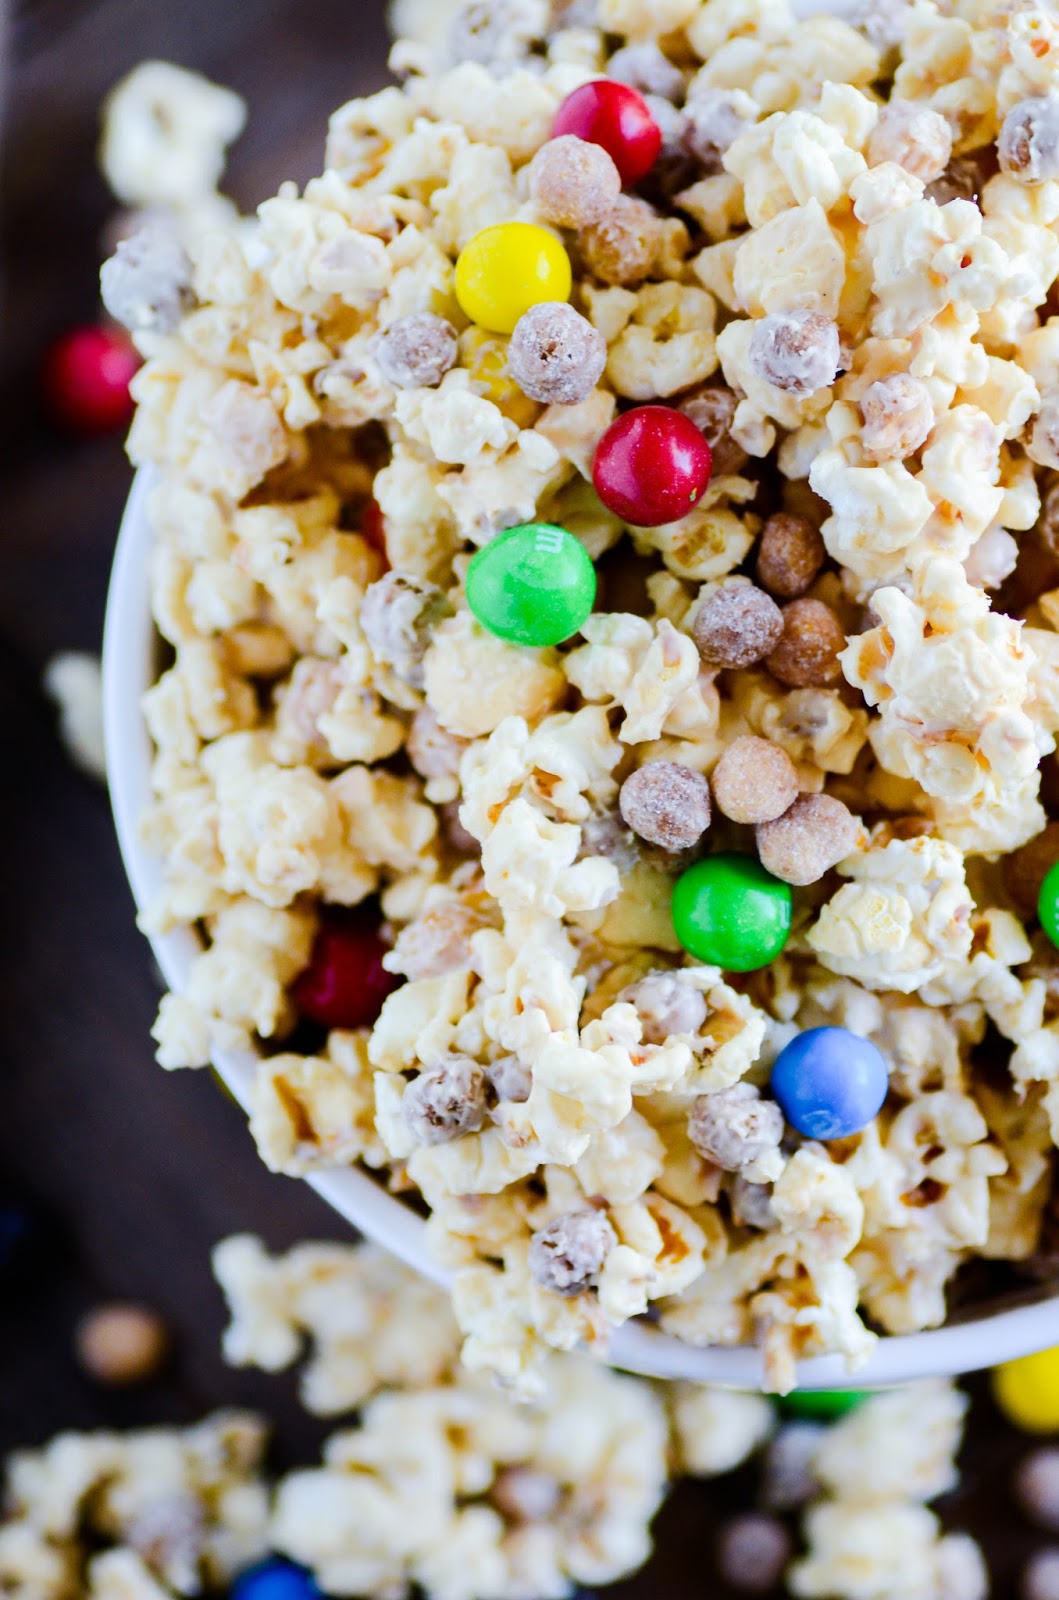 Crunchy, creamy, sweet and peanut butter-y snack mix filled with Reese's Puffs, kettle corn, and Pretzel M&Ms. Ready in under 30 minutes, and you won’t be able to put it down!